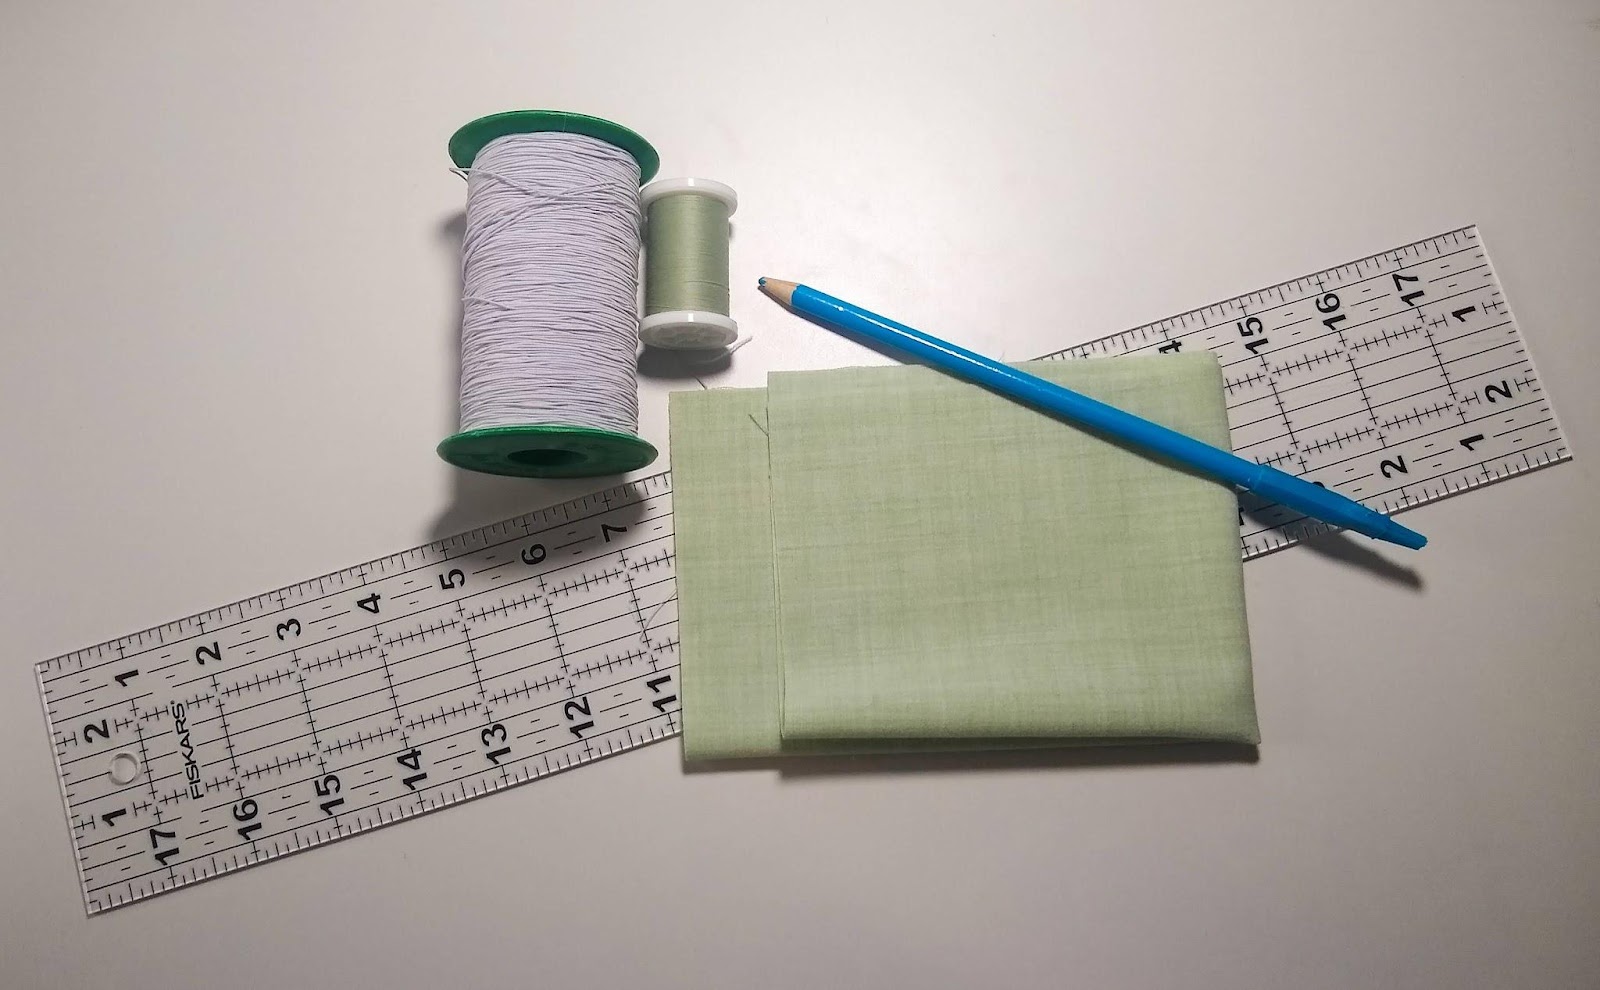 Elastic Thread Projects: Expanding Your Crafting Horizons